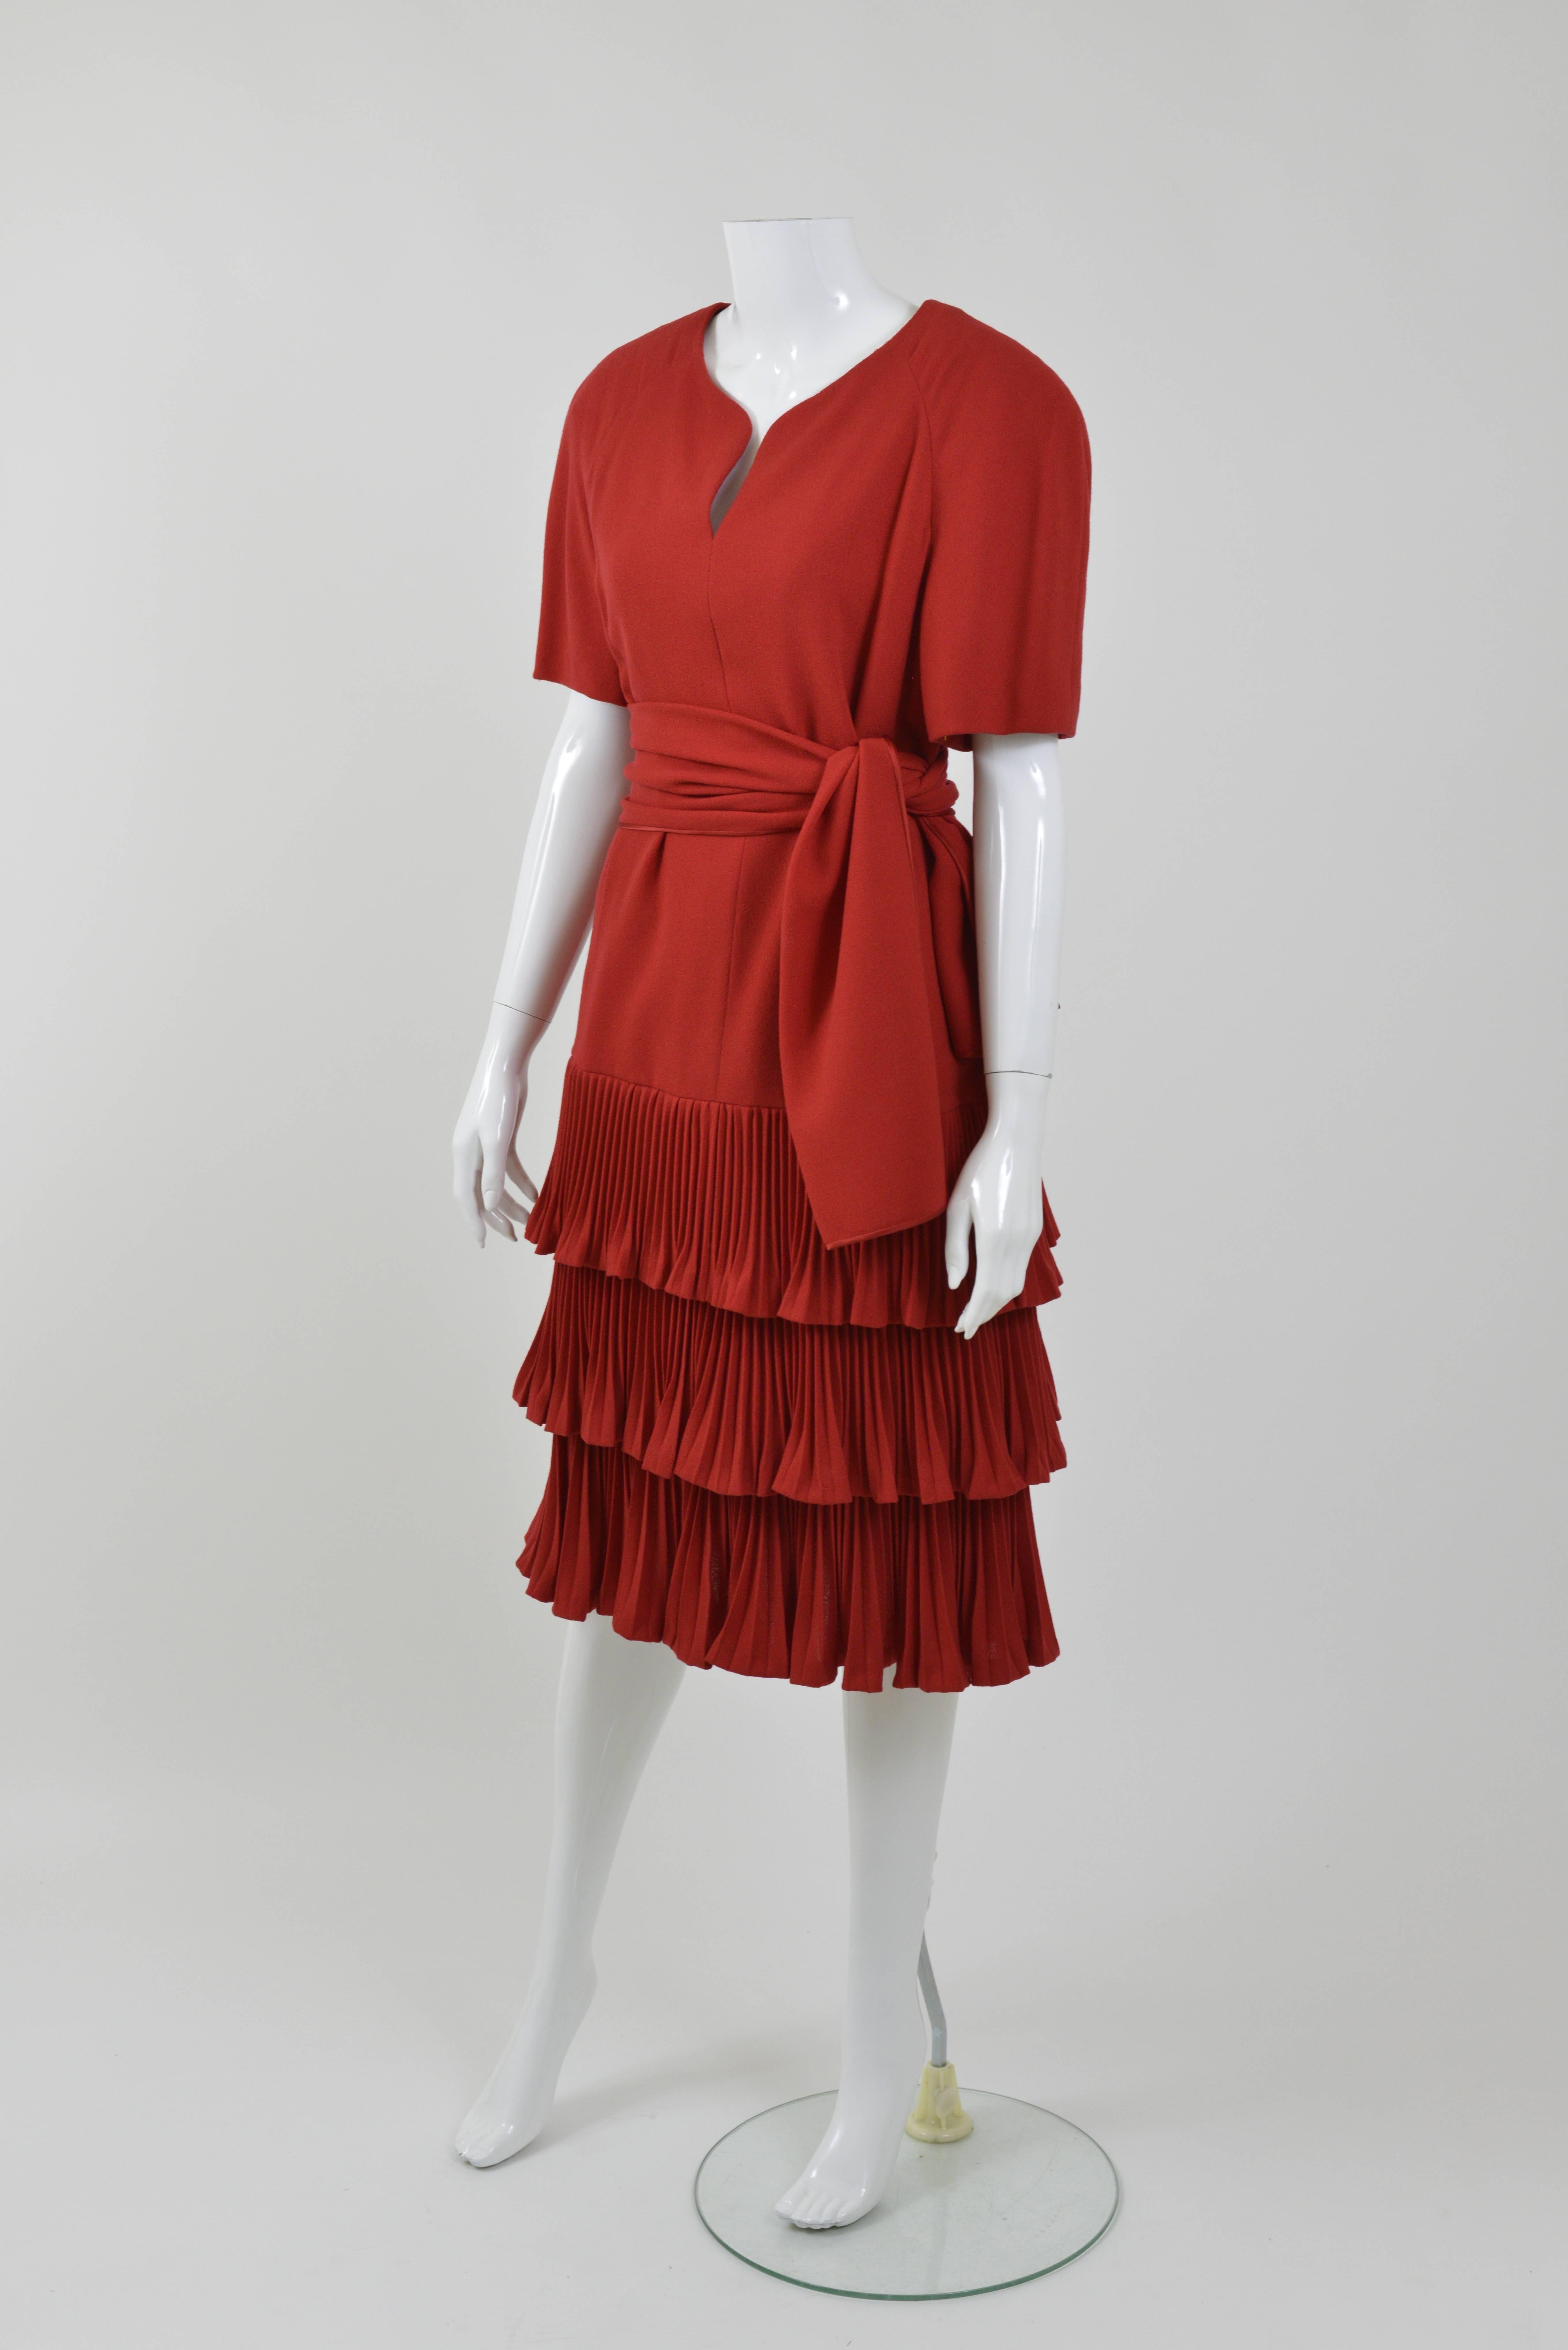 1990s VALENTINO COUTURE Red Pleateds Cocktail Dress For Sale 1